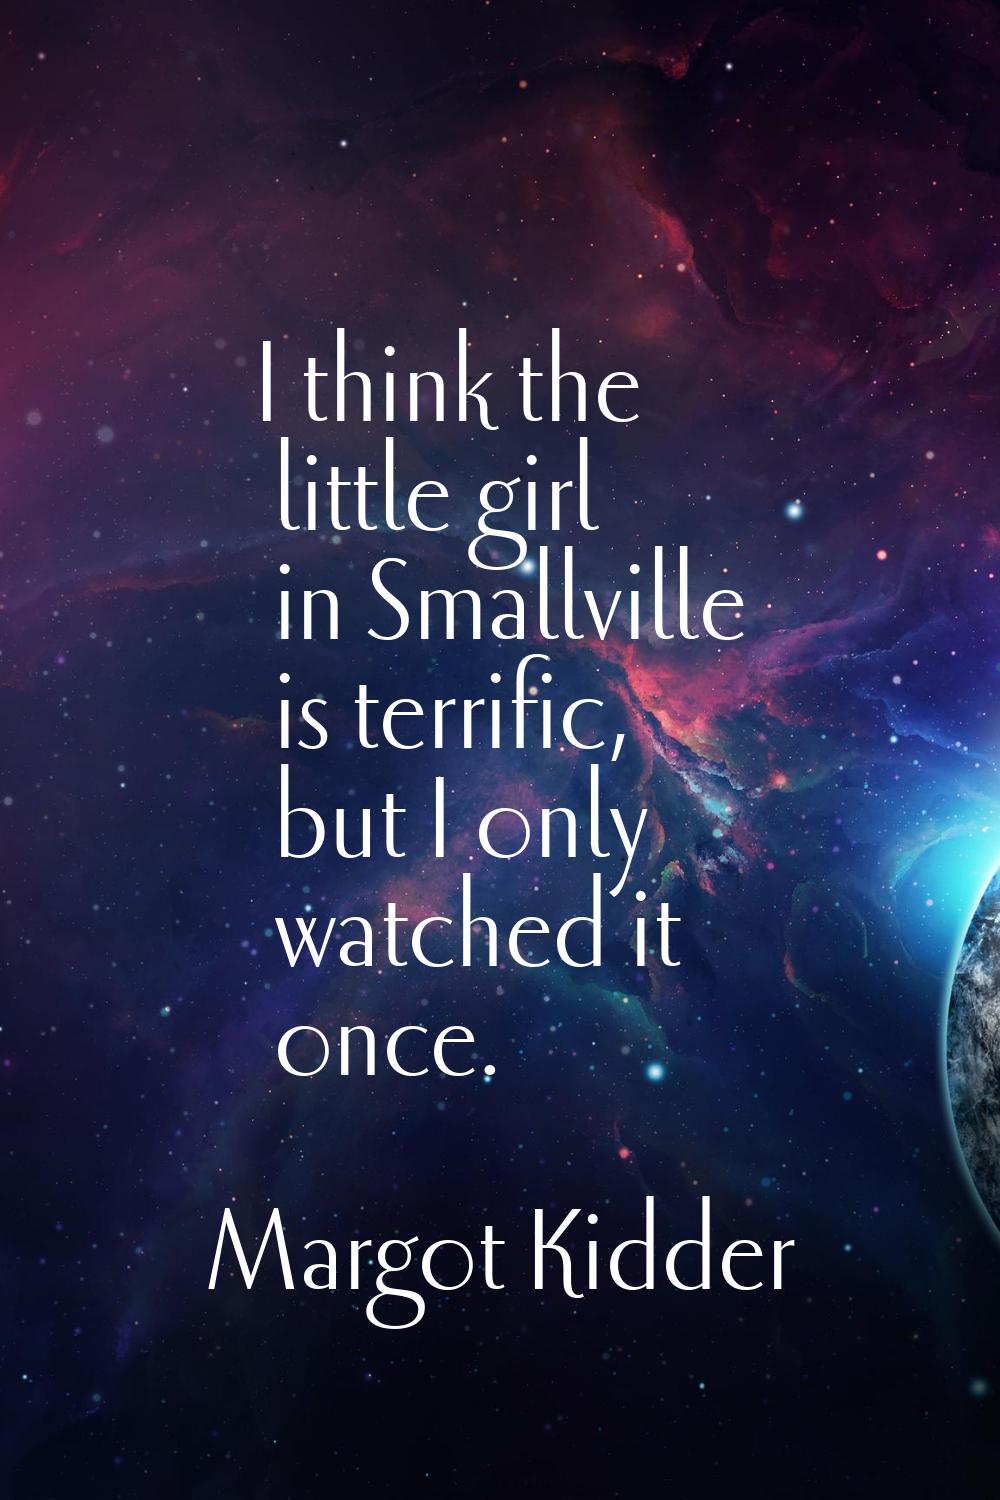 I think the little girl in Smallville is terrific, but I only watched it once.